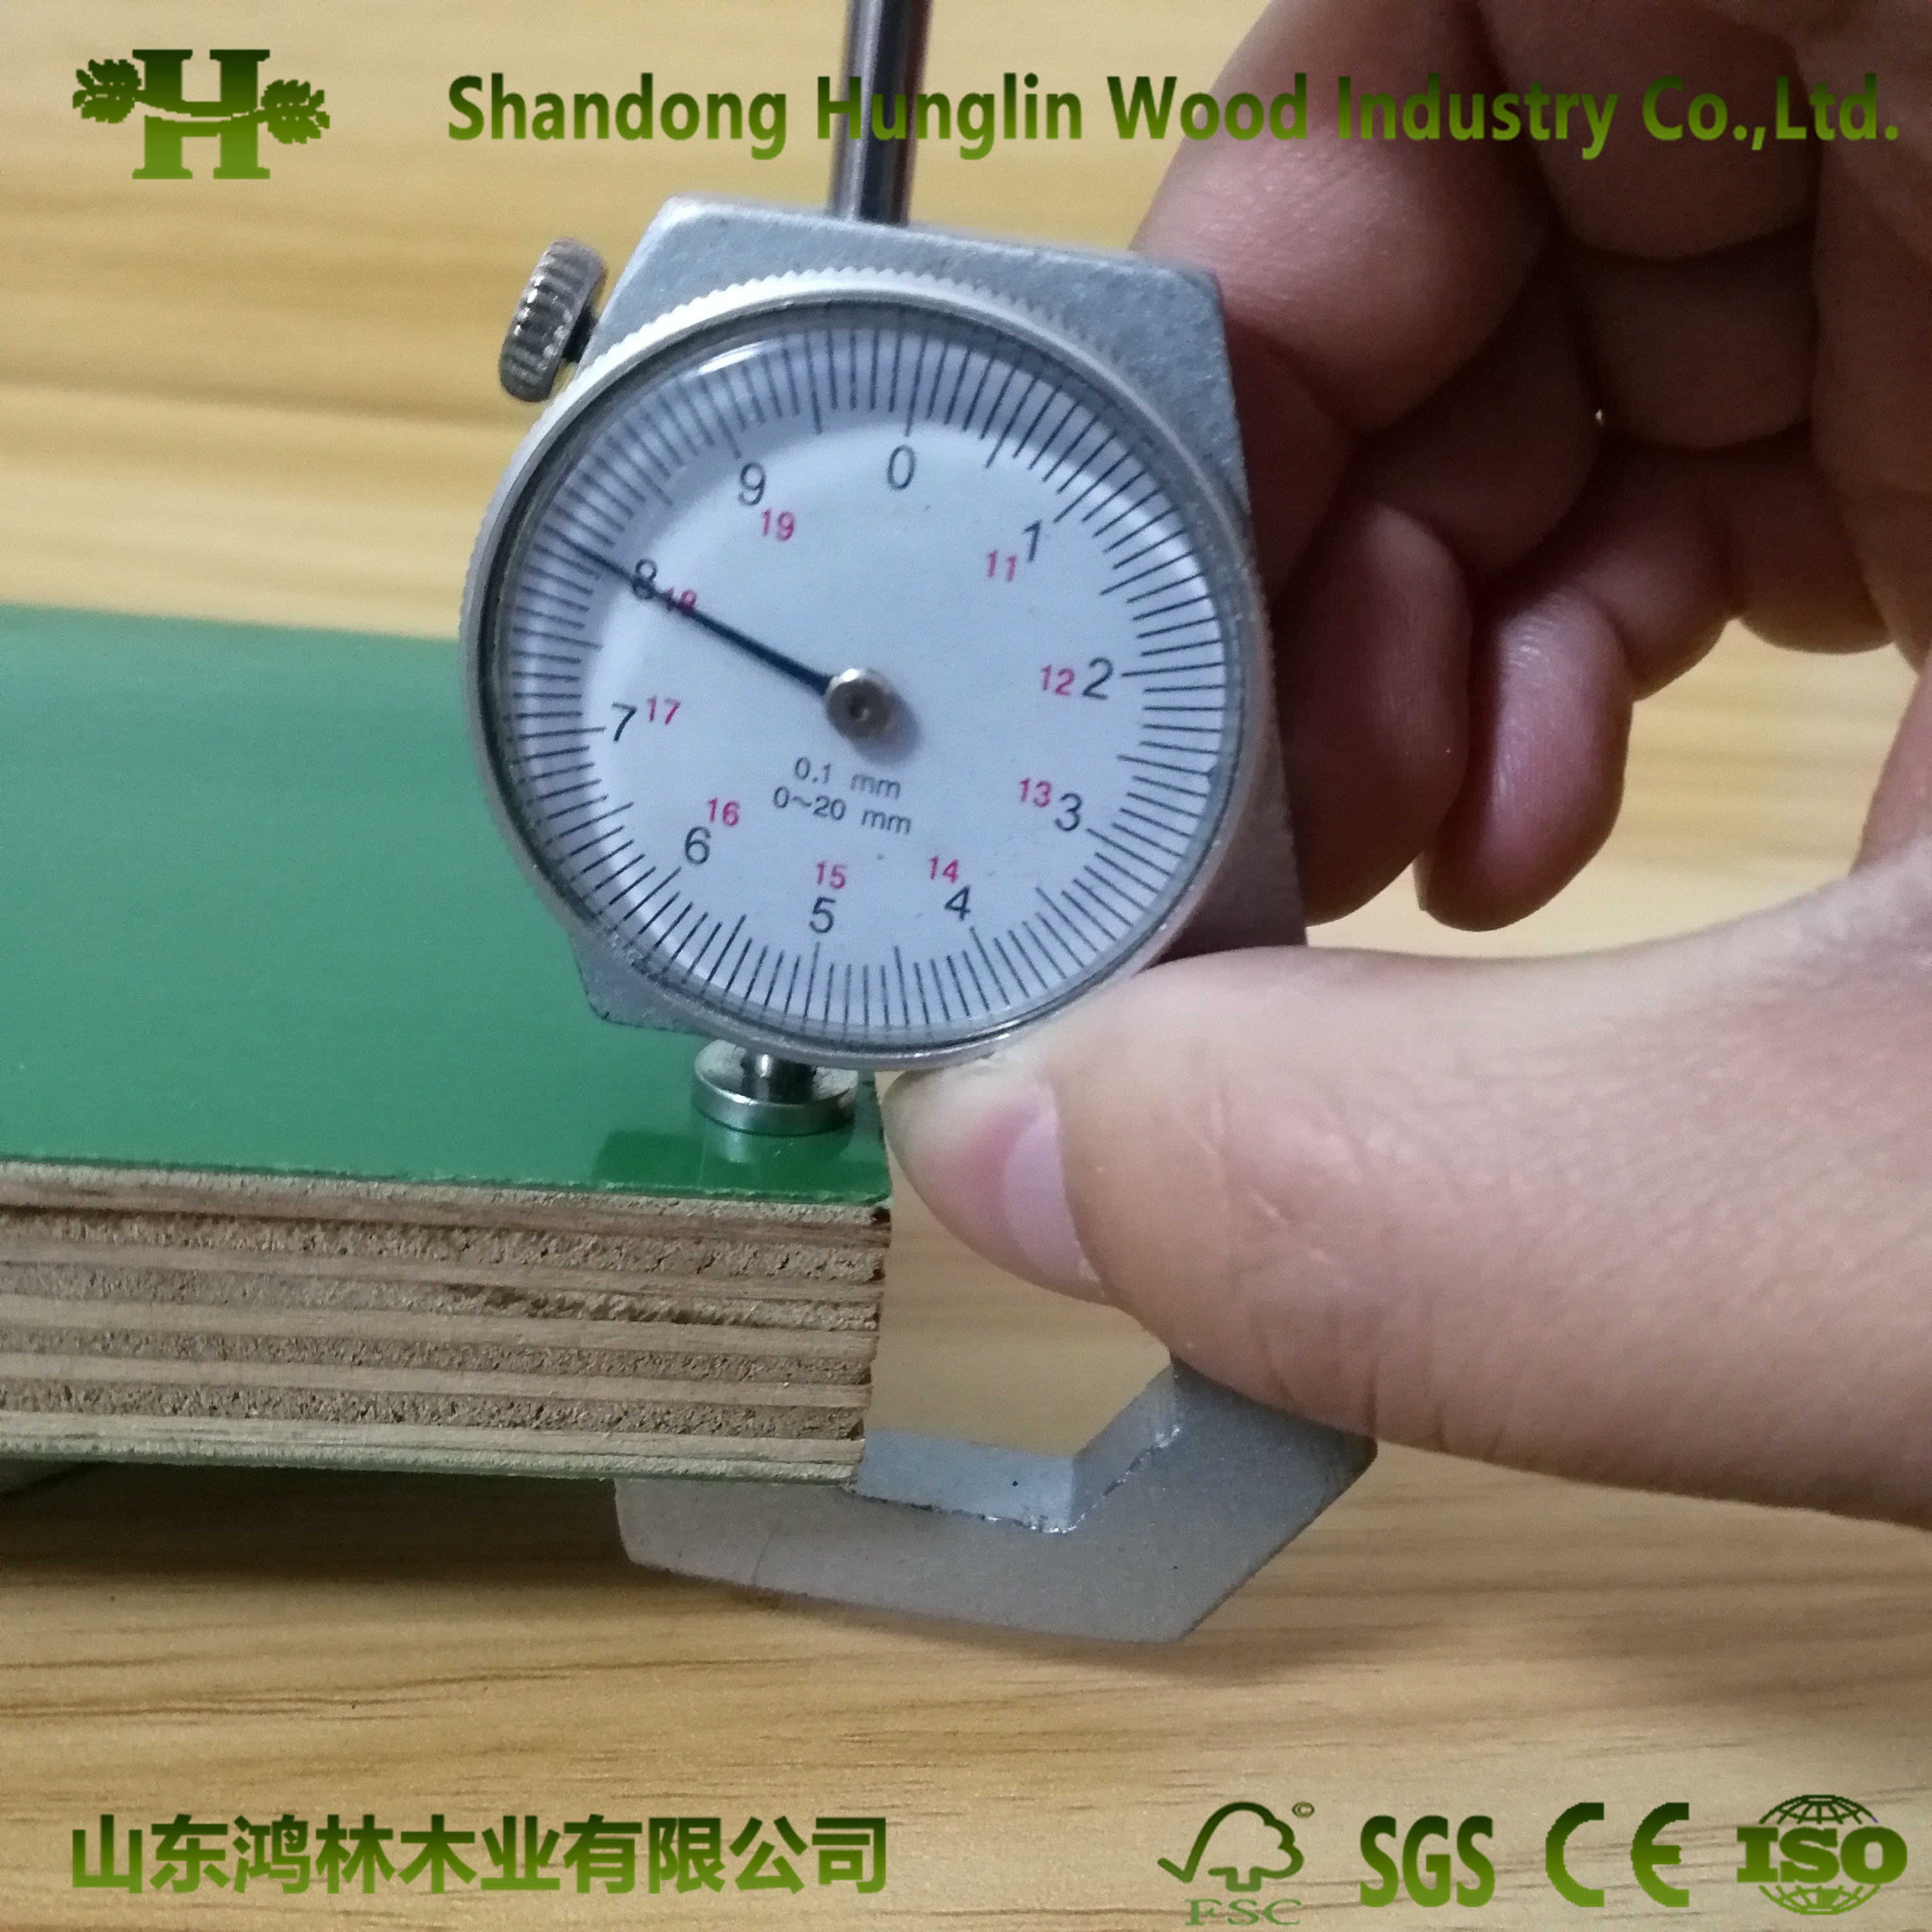 Green PP Plastic Film Faced Plywood / Marine Plywood